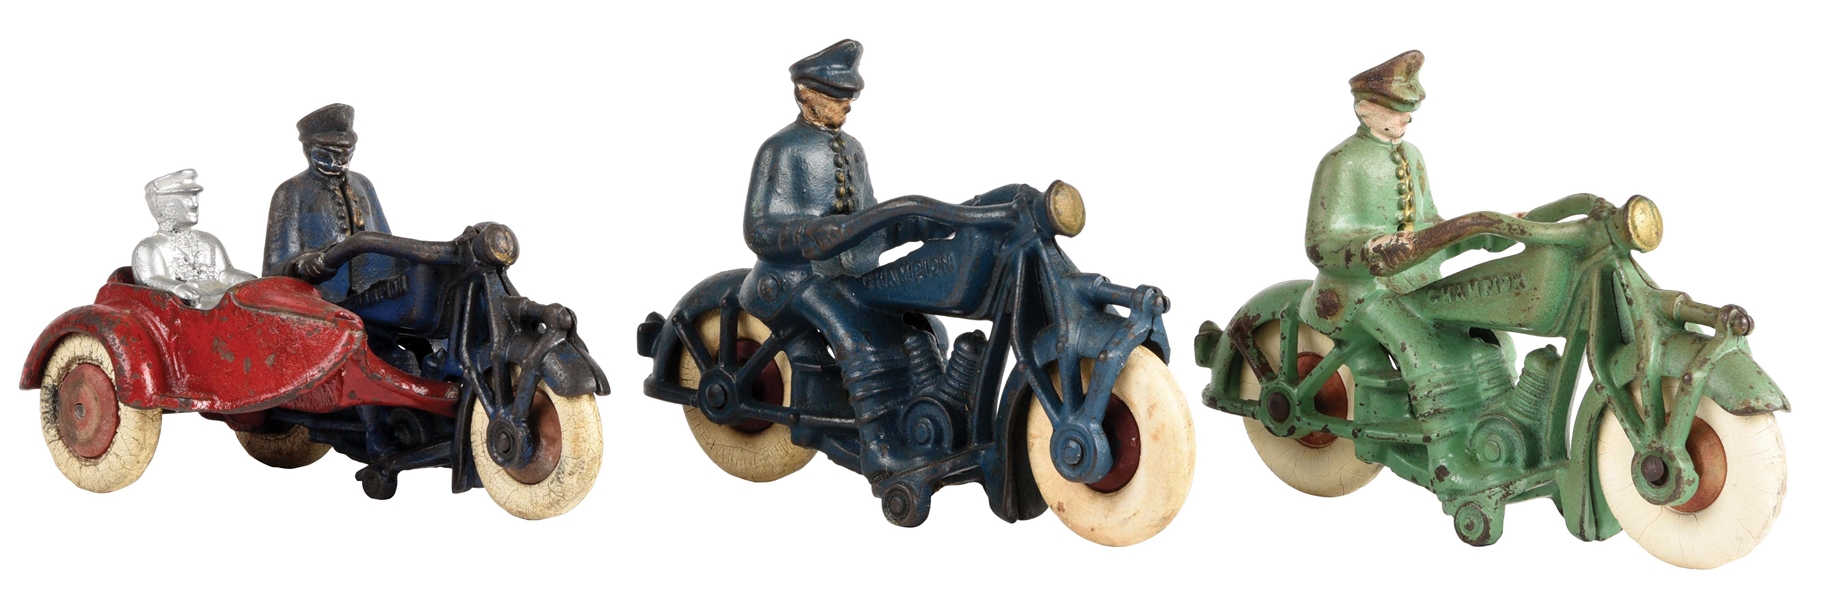 LOT OF 3: CAST-IRON CHAMPION POLICE MOTORCYCLE TOYS.